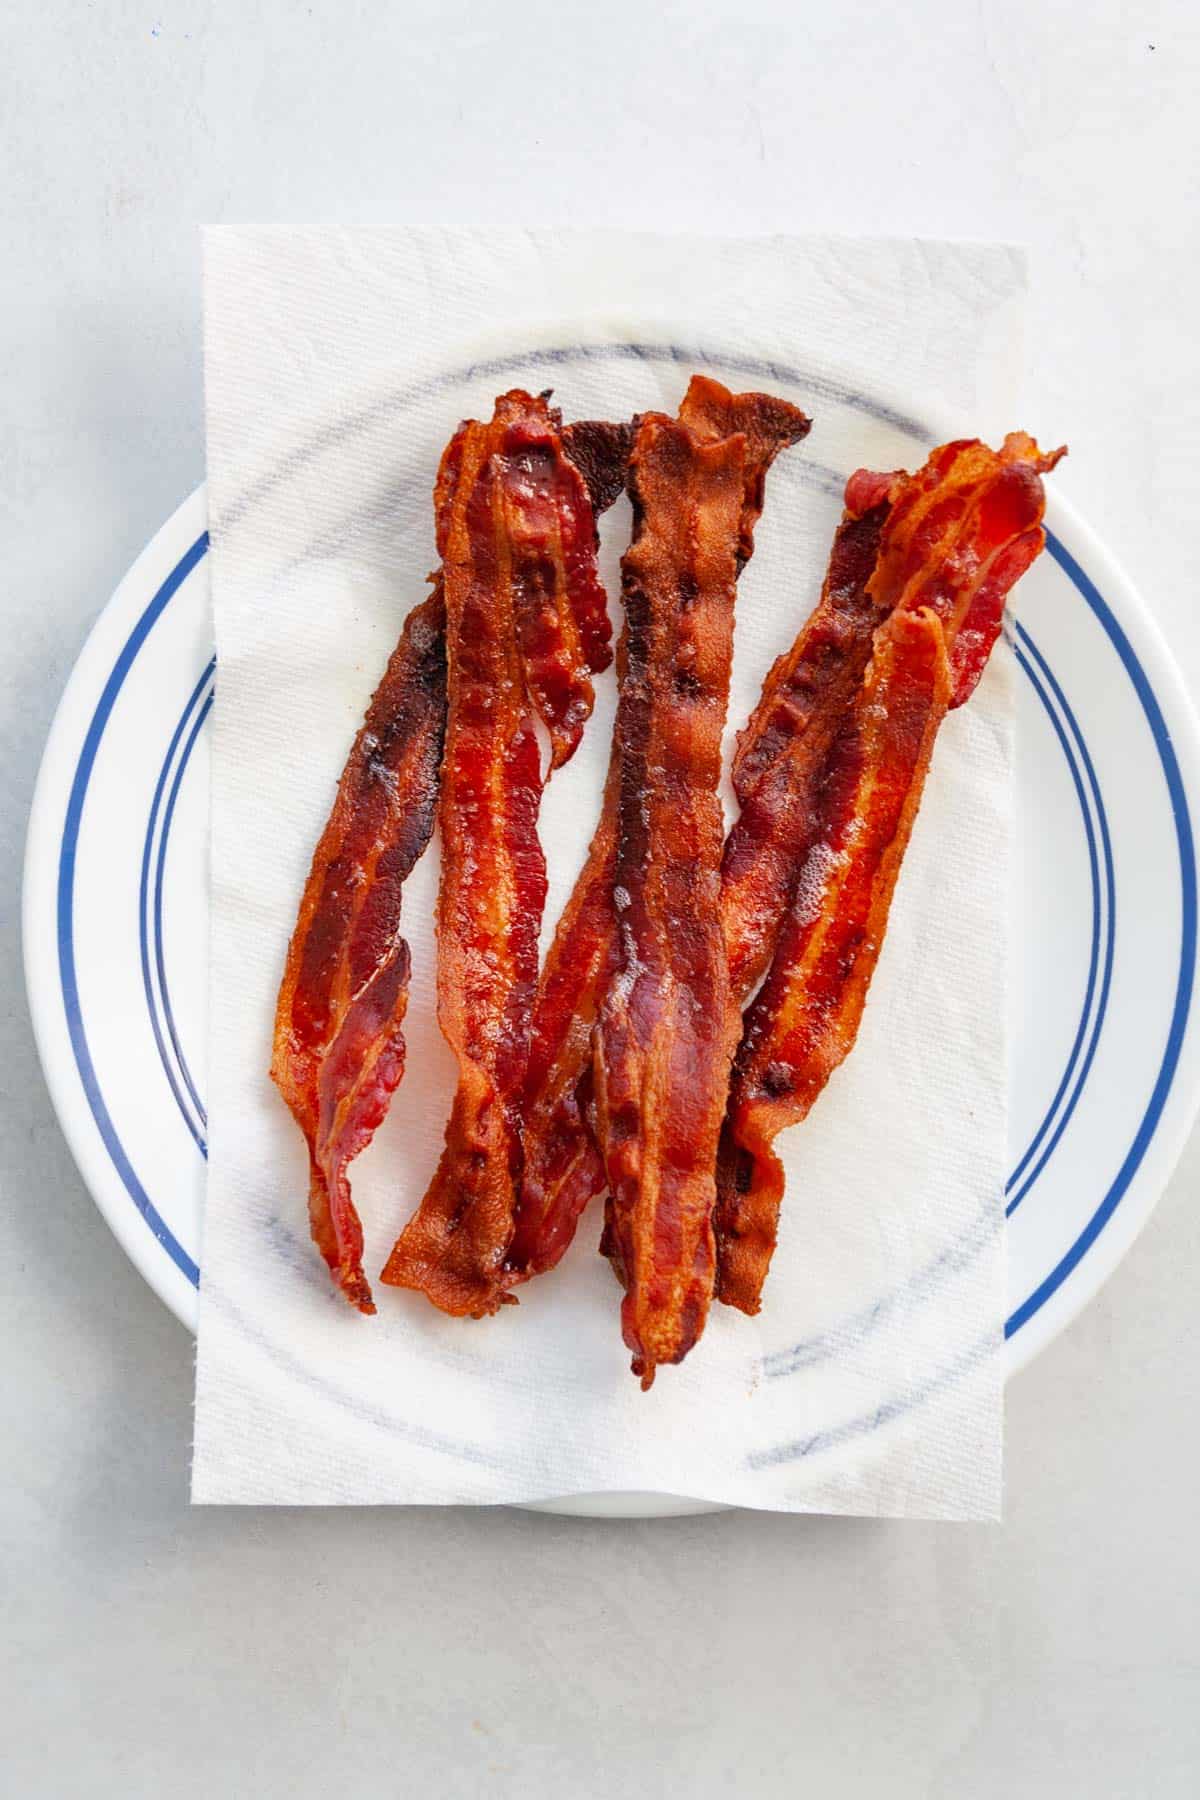 strips of cooked bacon on a plate covered with a paper towel